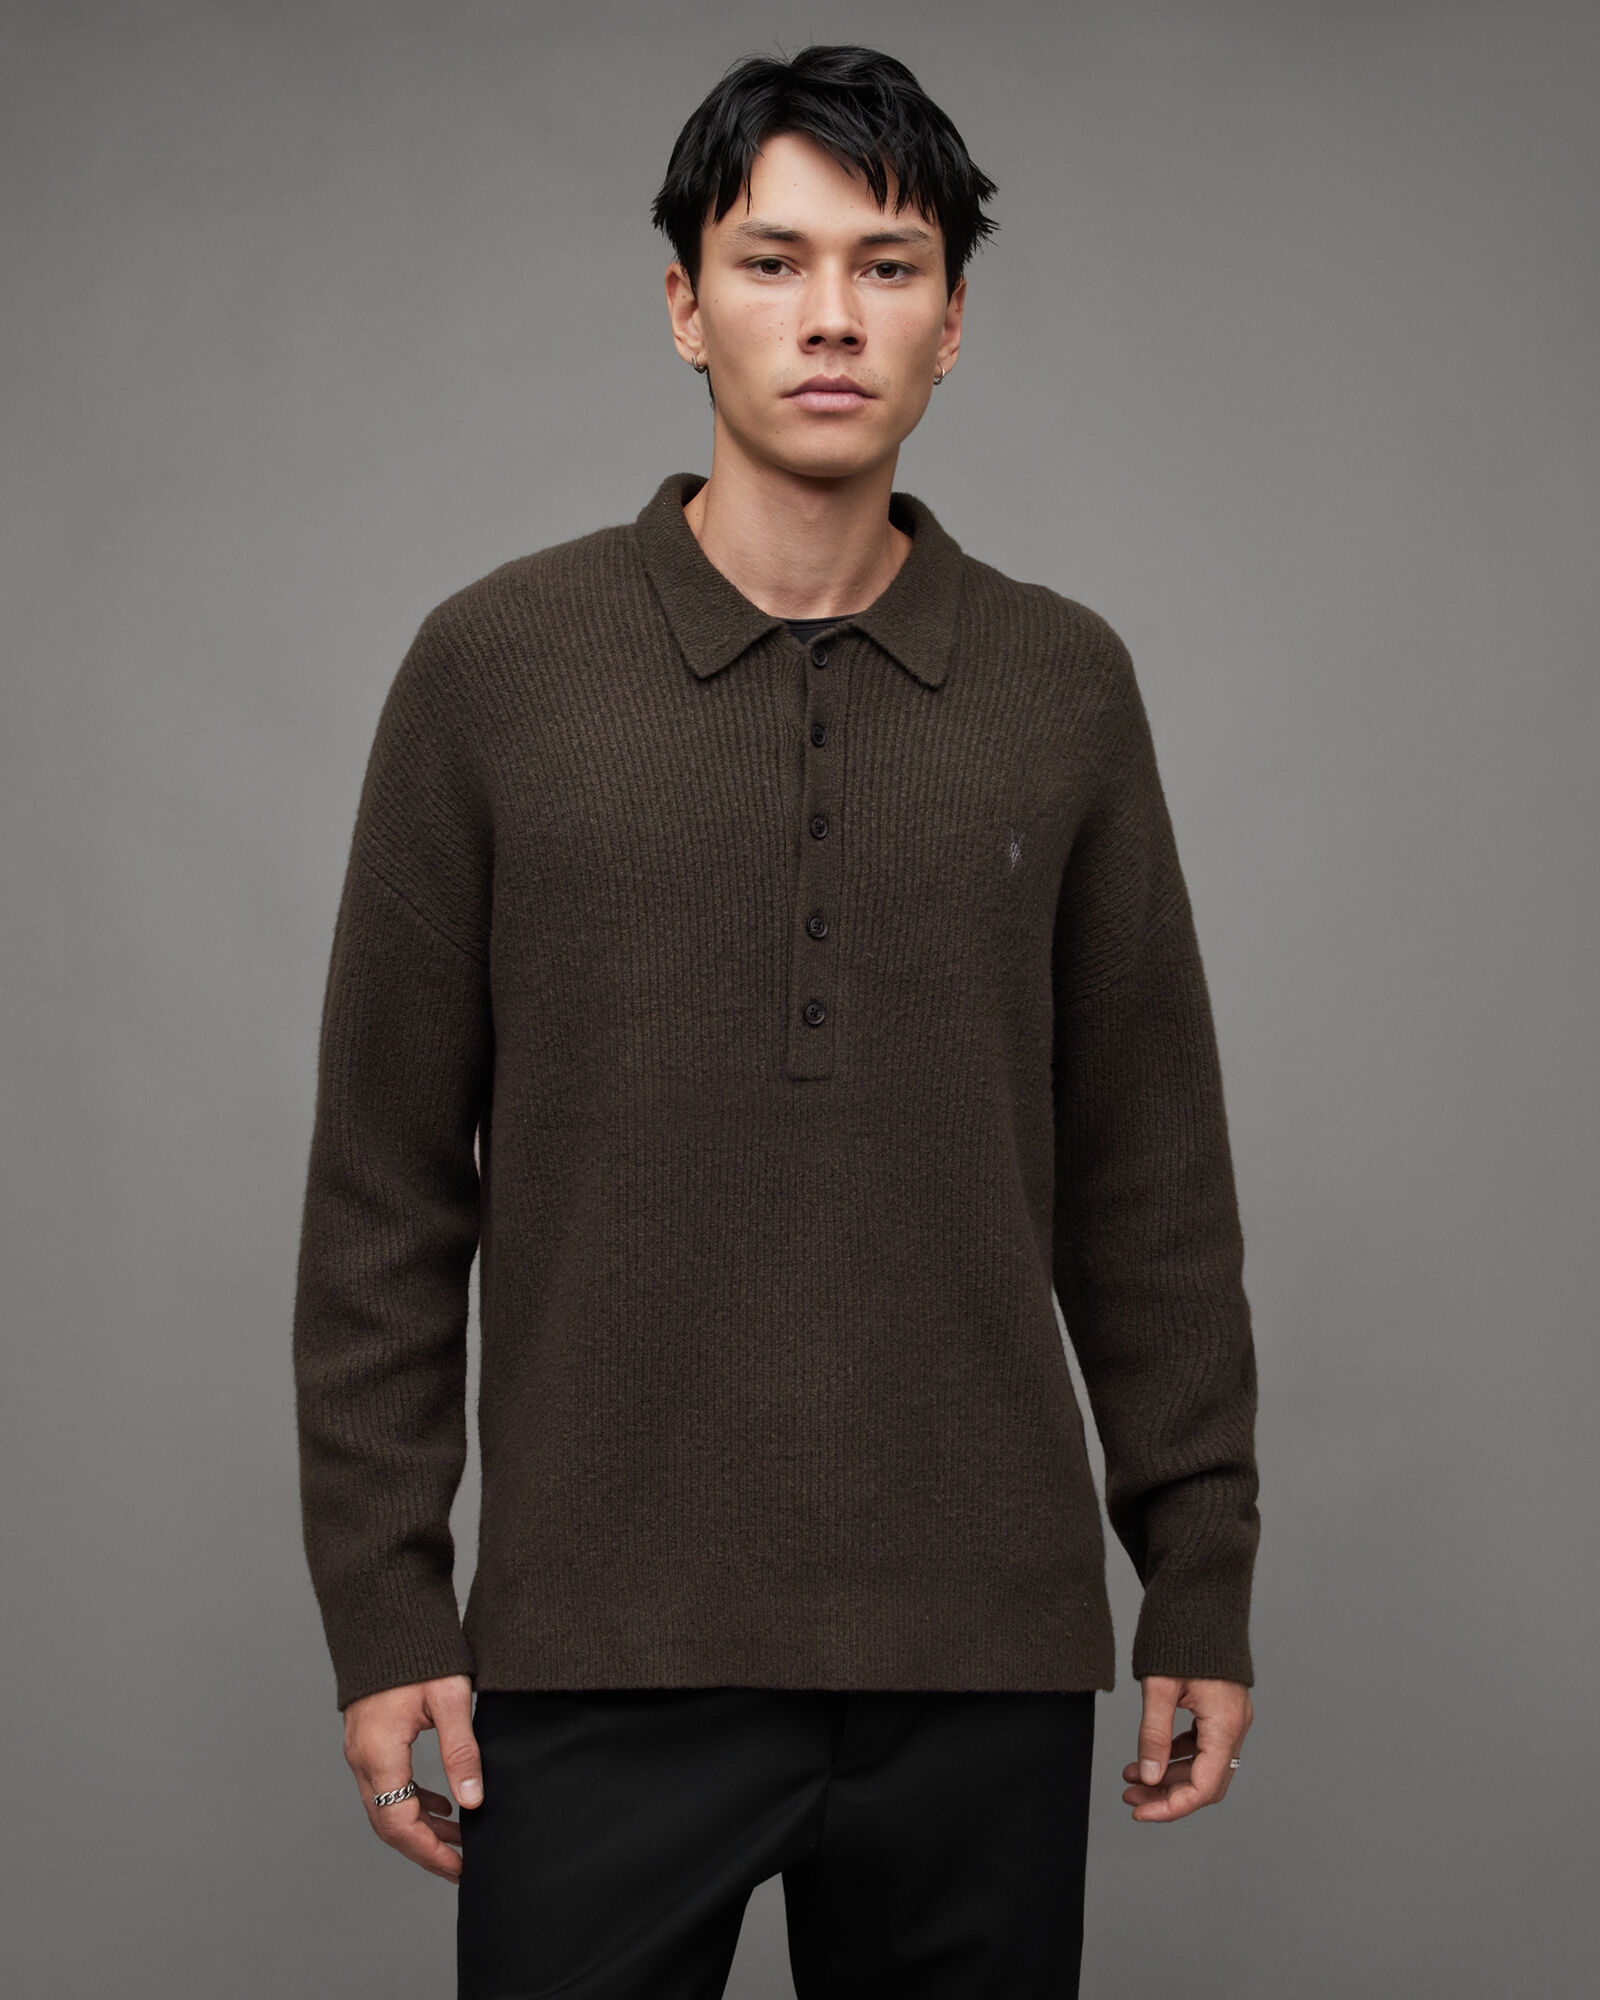 OVY Wool Cashmere Warm Knit Polo - トップス